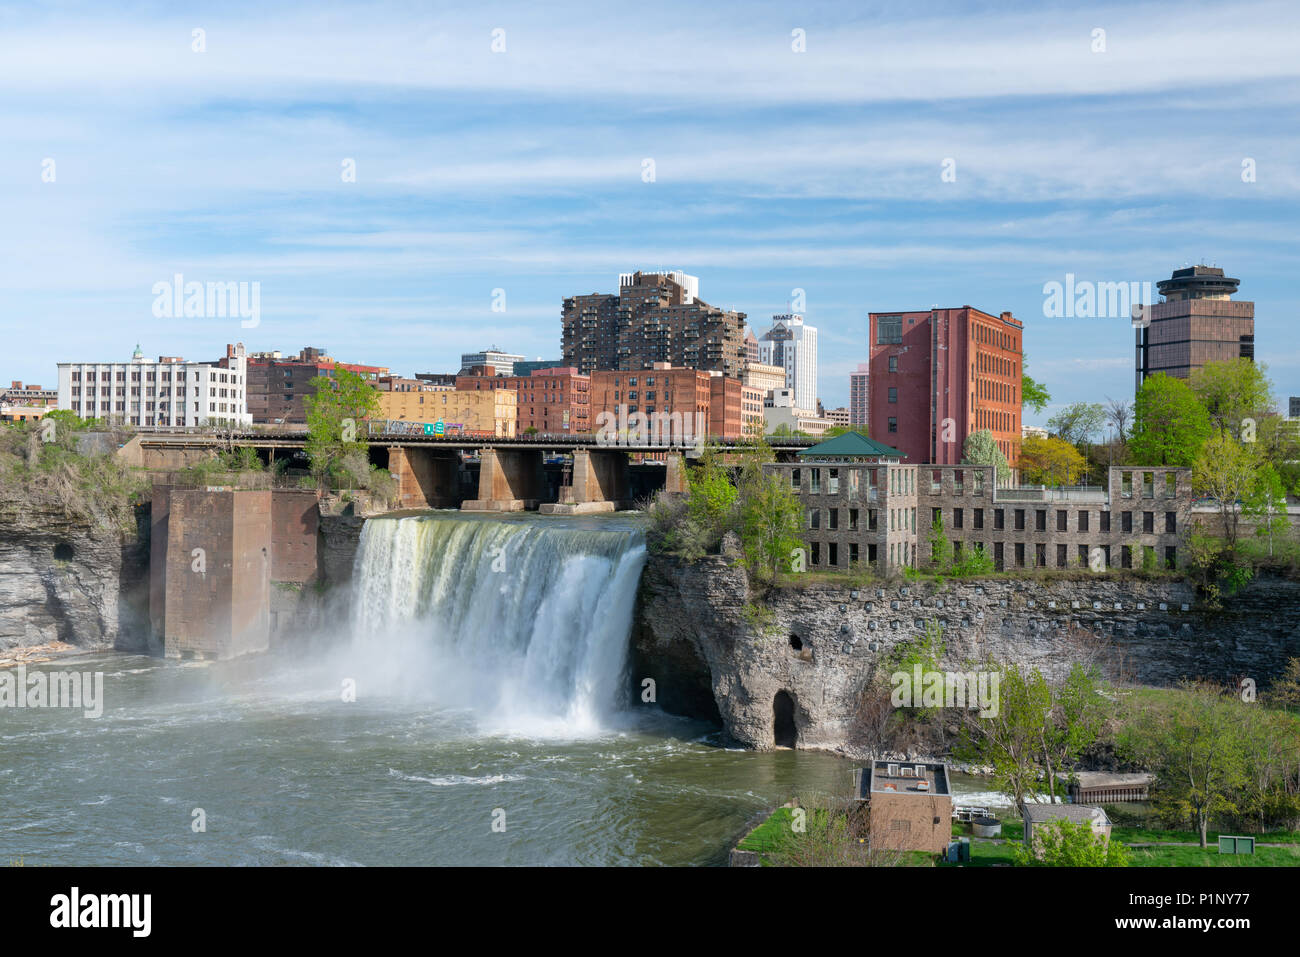 ROCHESTER, NY - MAY 14, 2018: Skyline of Rochester, New York at the High Falls along the Genesee River Stock Photo